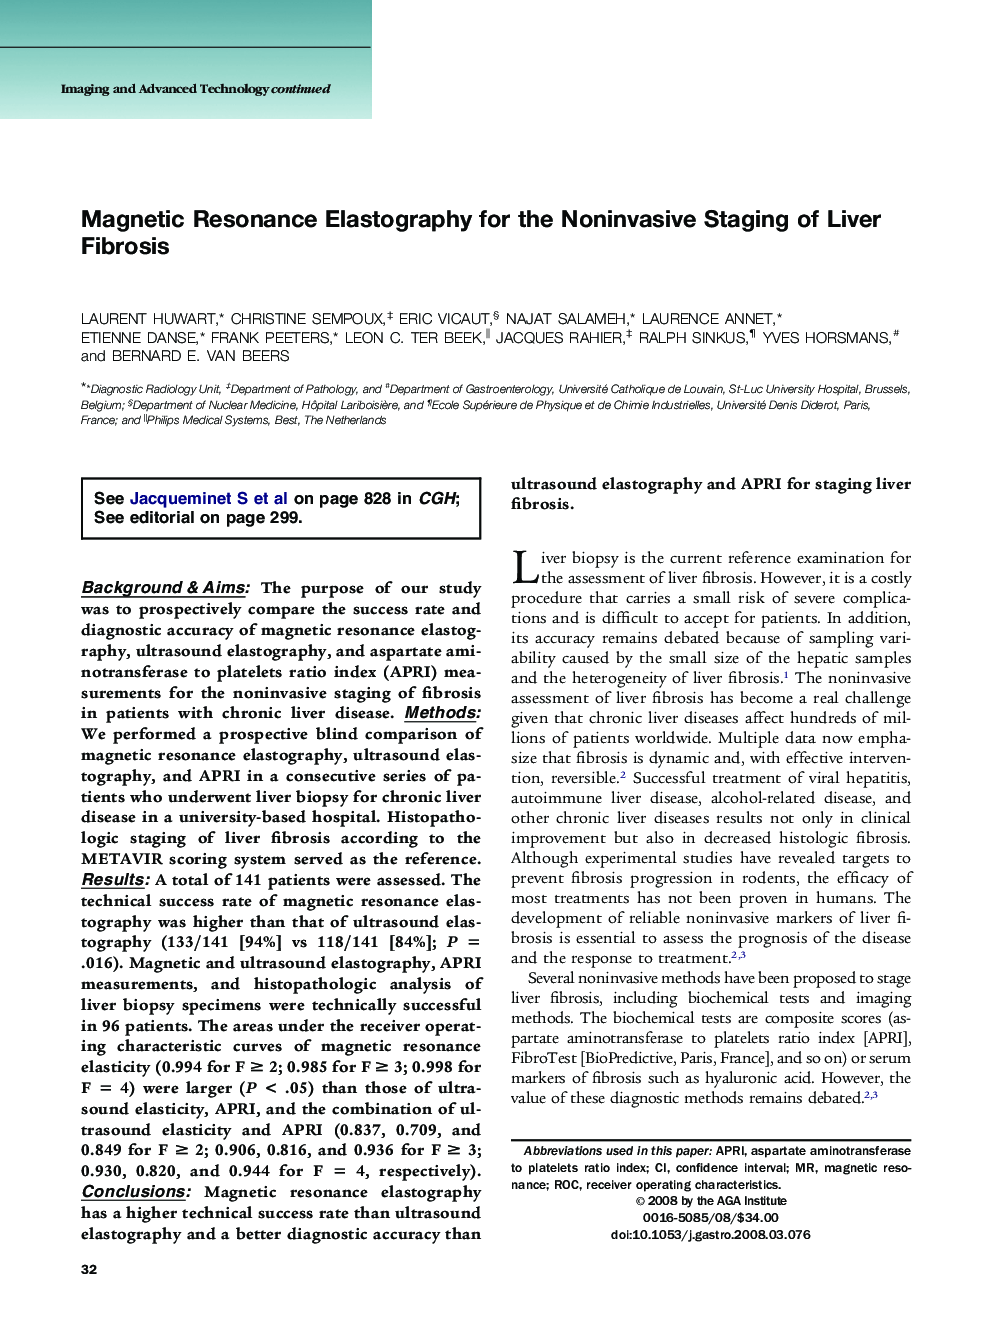 Magnetic Resonance Elastography for the Noninvasive Staging of Liver Fibrosis 